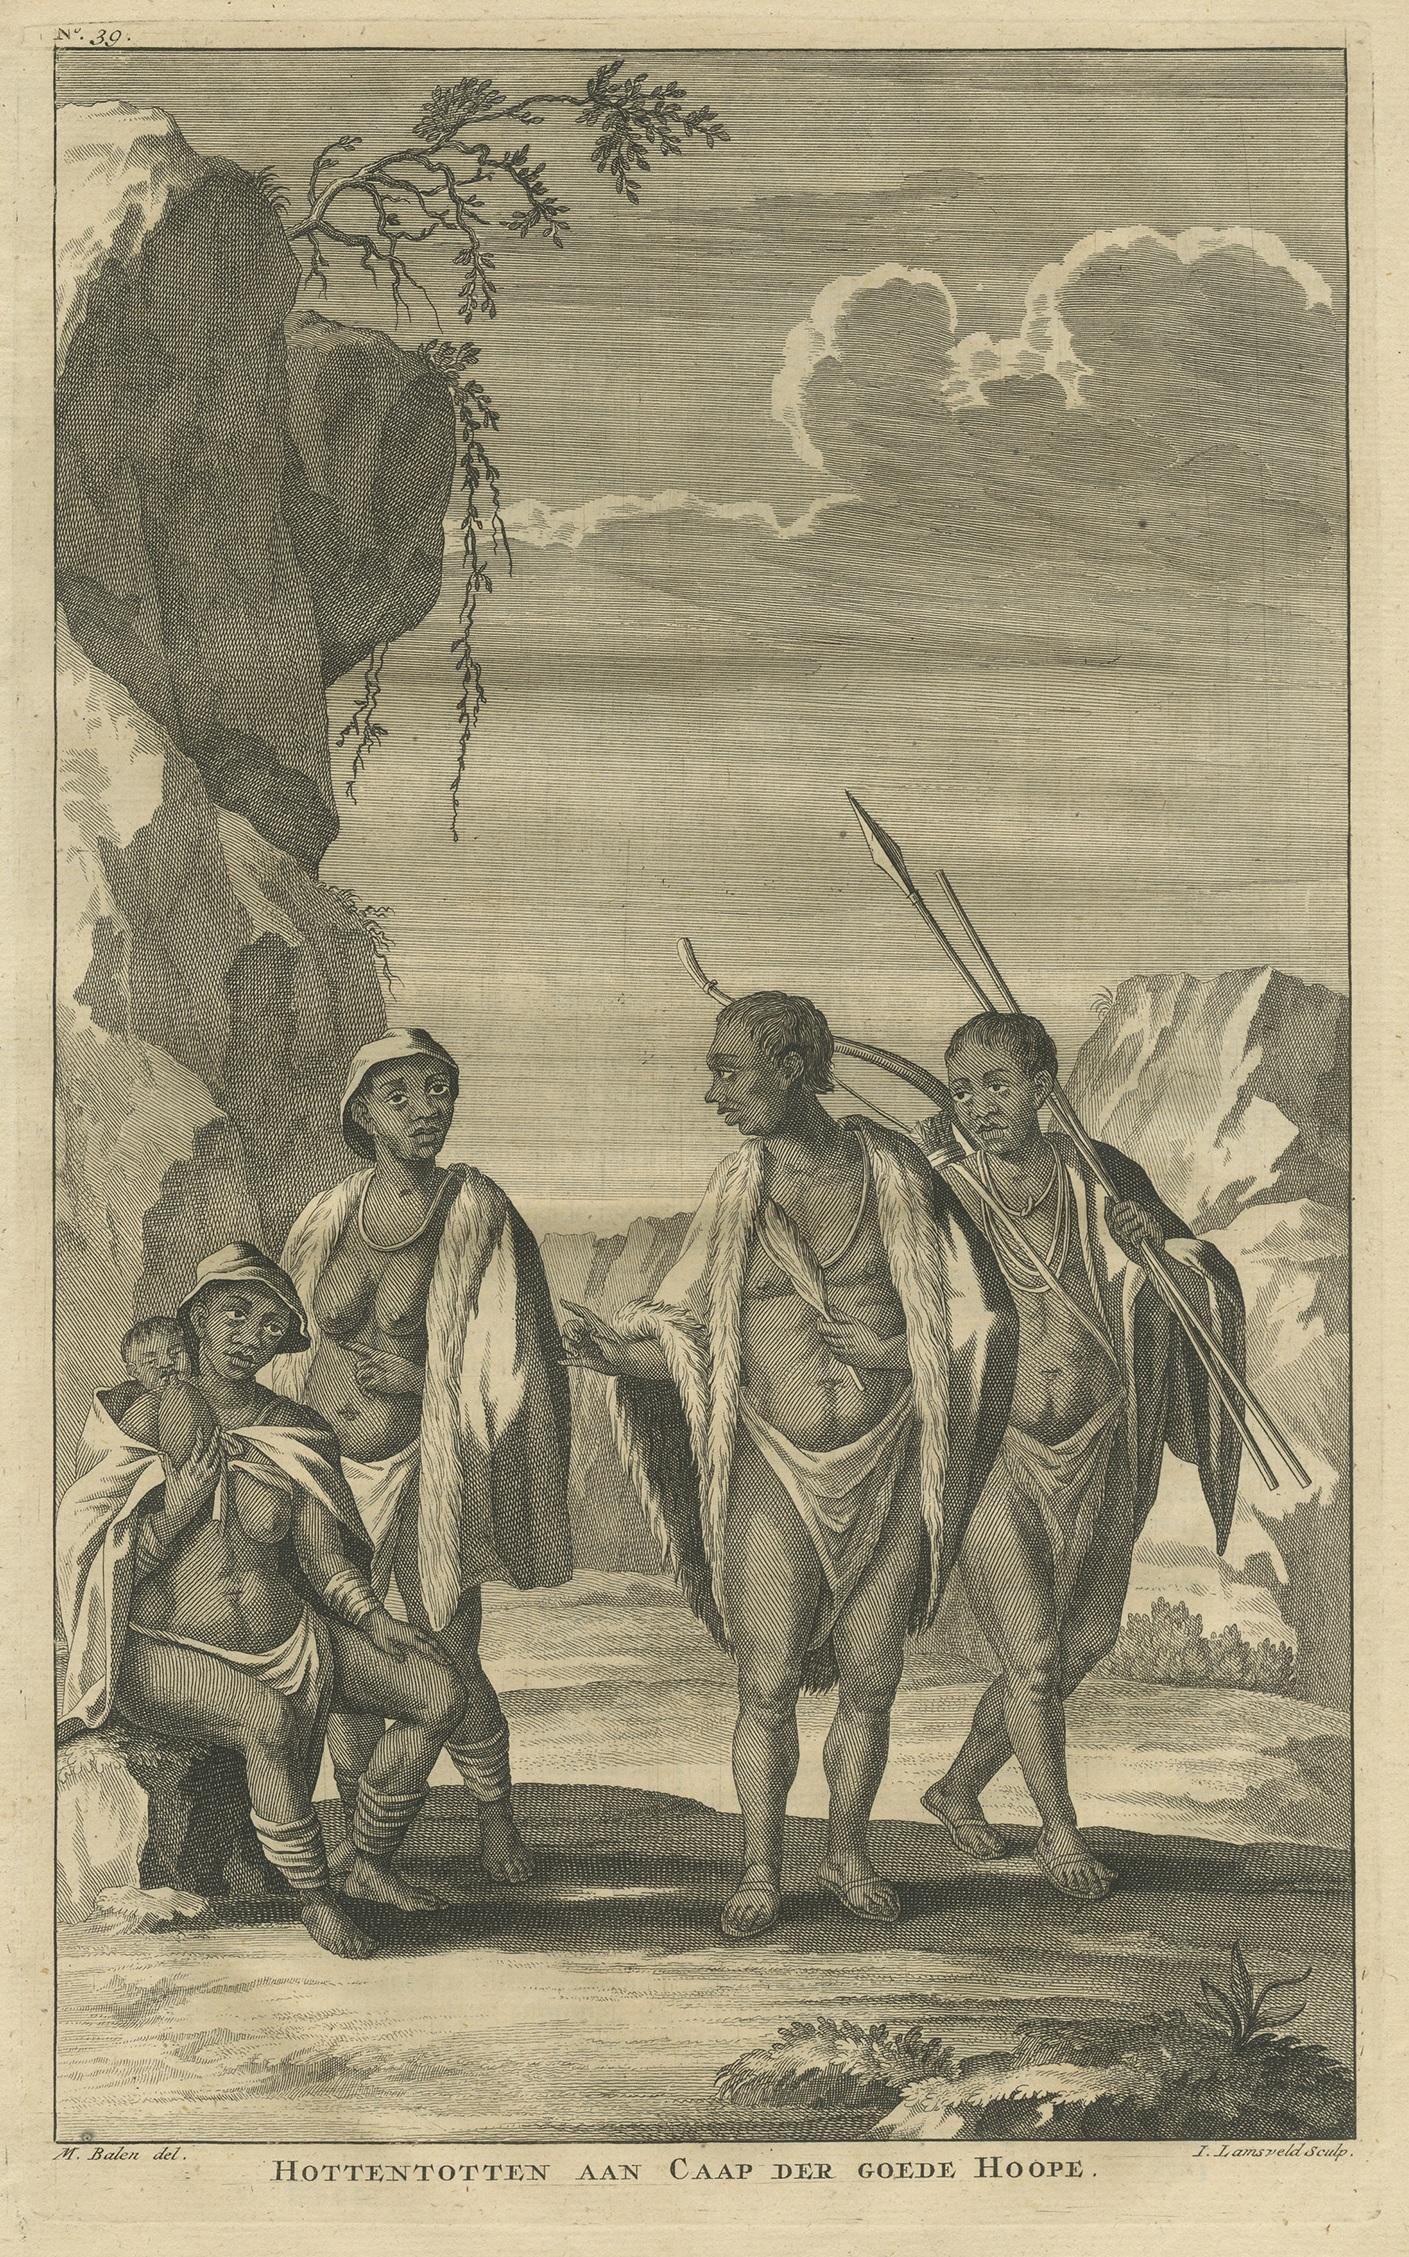 Antique print titled 'Hottentotten aan Caap der Goede Hoope'. Print depicting the Khoikhoi of Cape of Good Hope, Africa. Including two text pages. This print originates from 'Oud en Nieuw Oost-Indiën' by F. Valentijn.